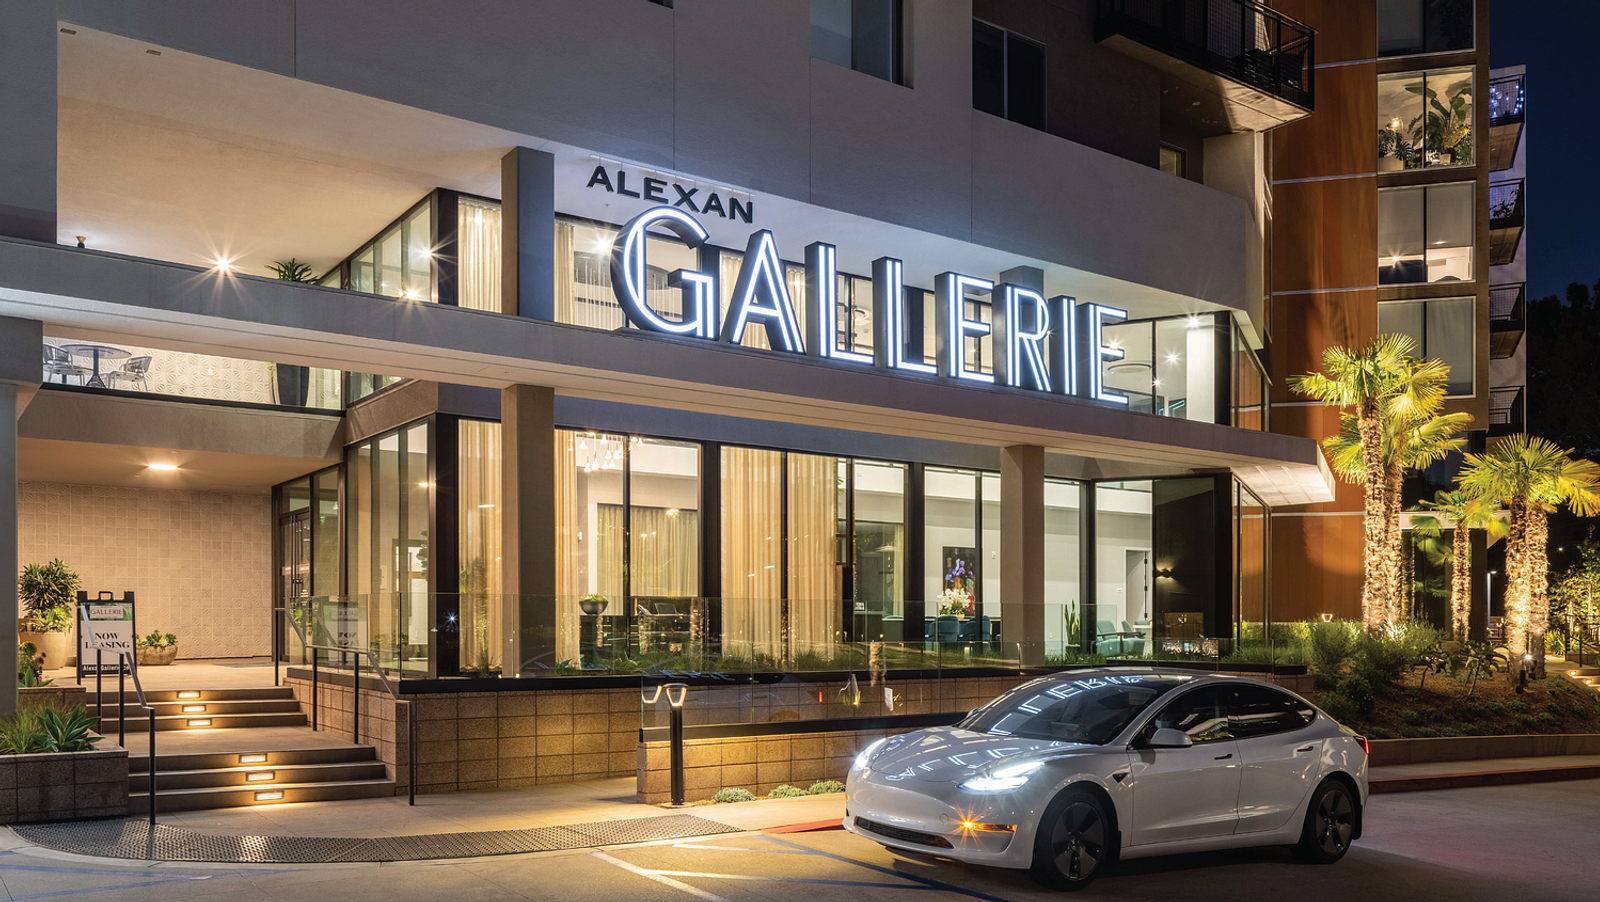 Building ID sign with the letters of Gallerie lit up with white light on the exterior of a building with a white tesla parked in front.